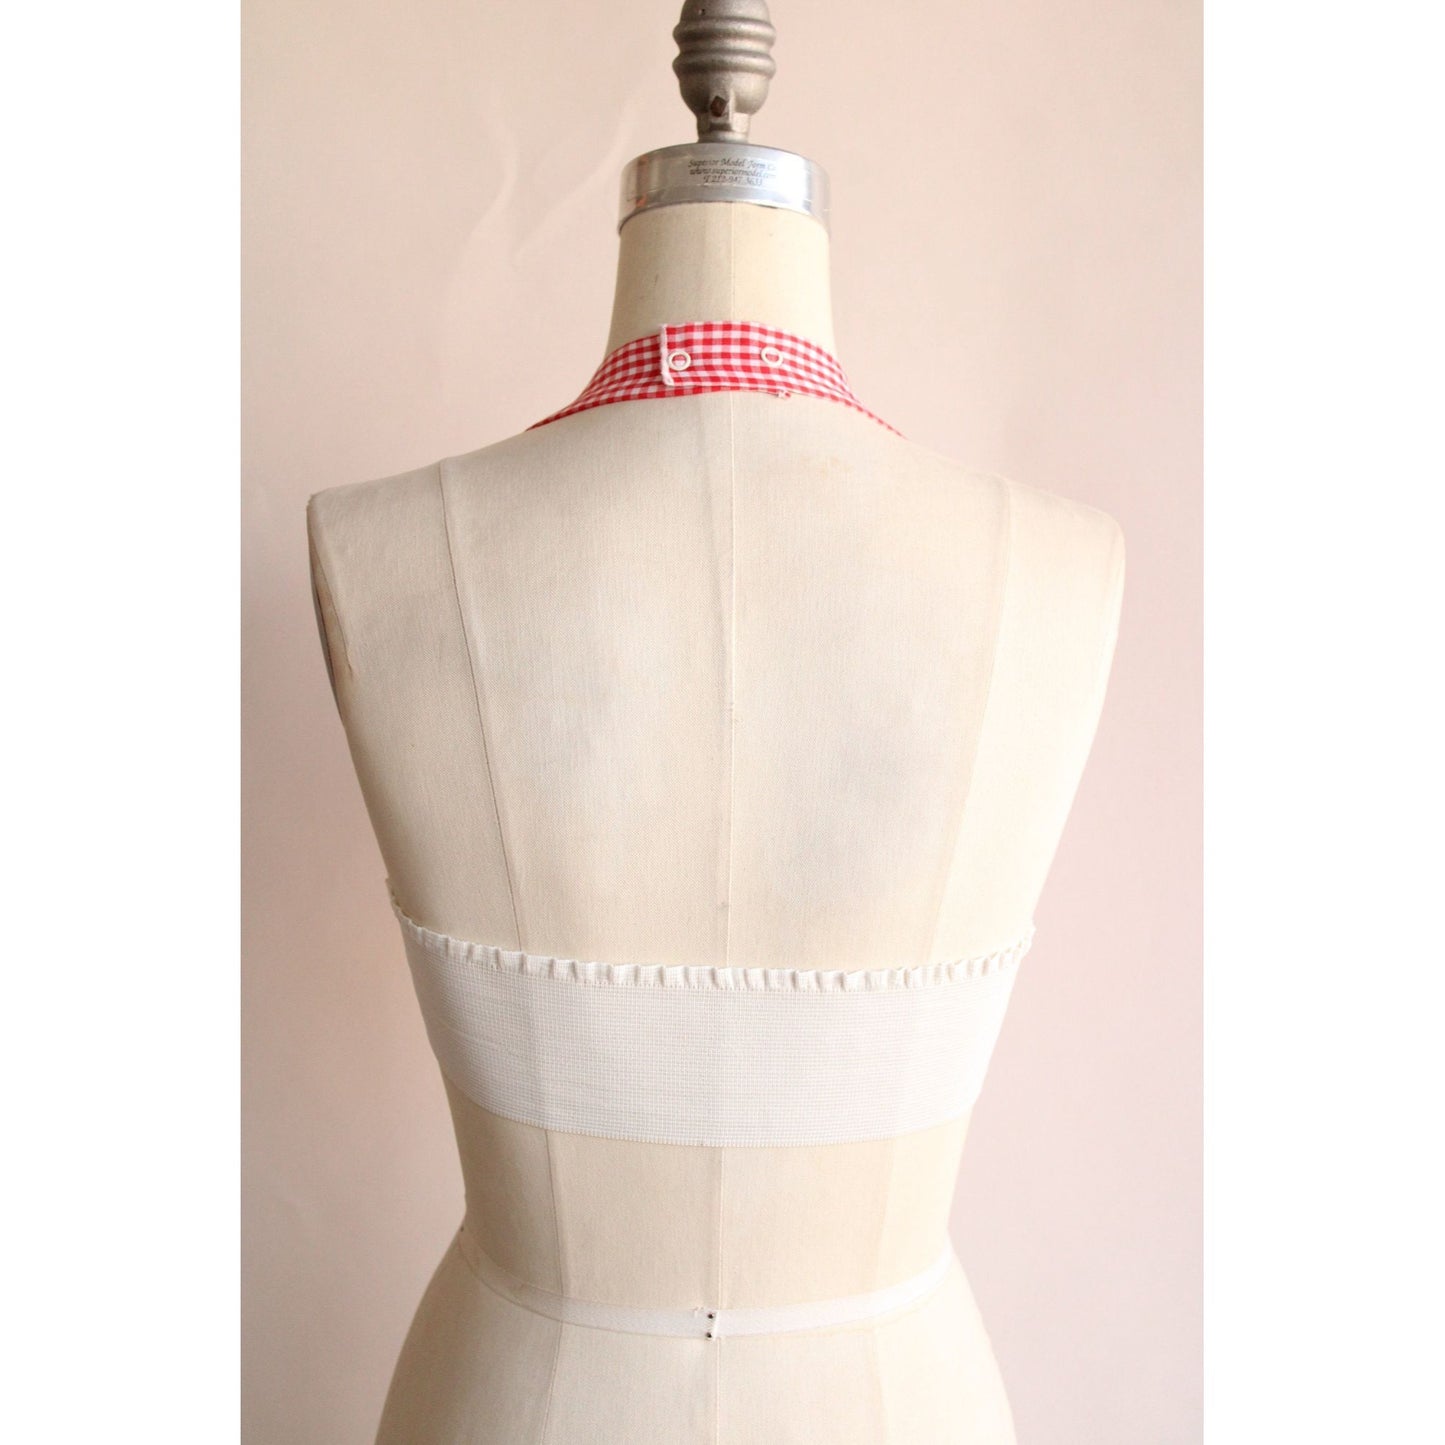 Vintage 1990s 2000s Red and White Gingham Check Halter Bra Top